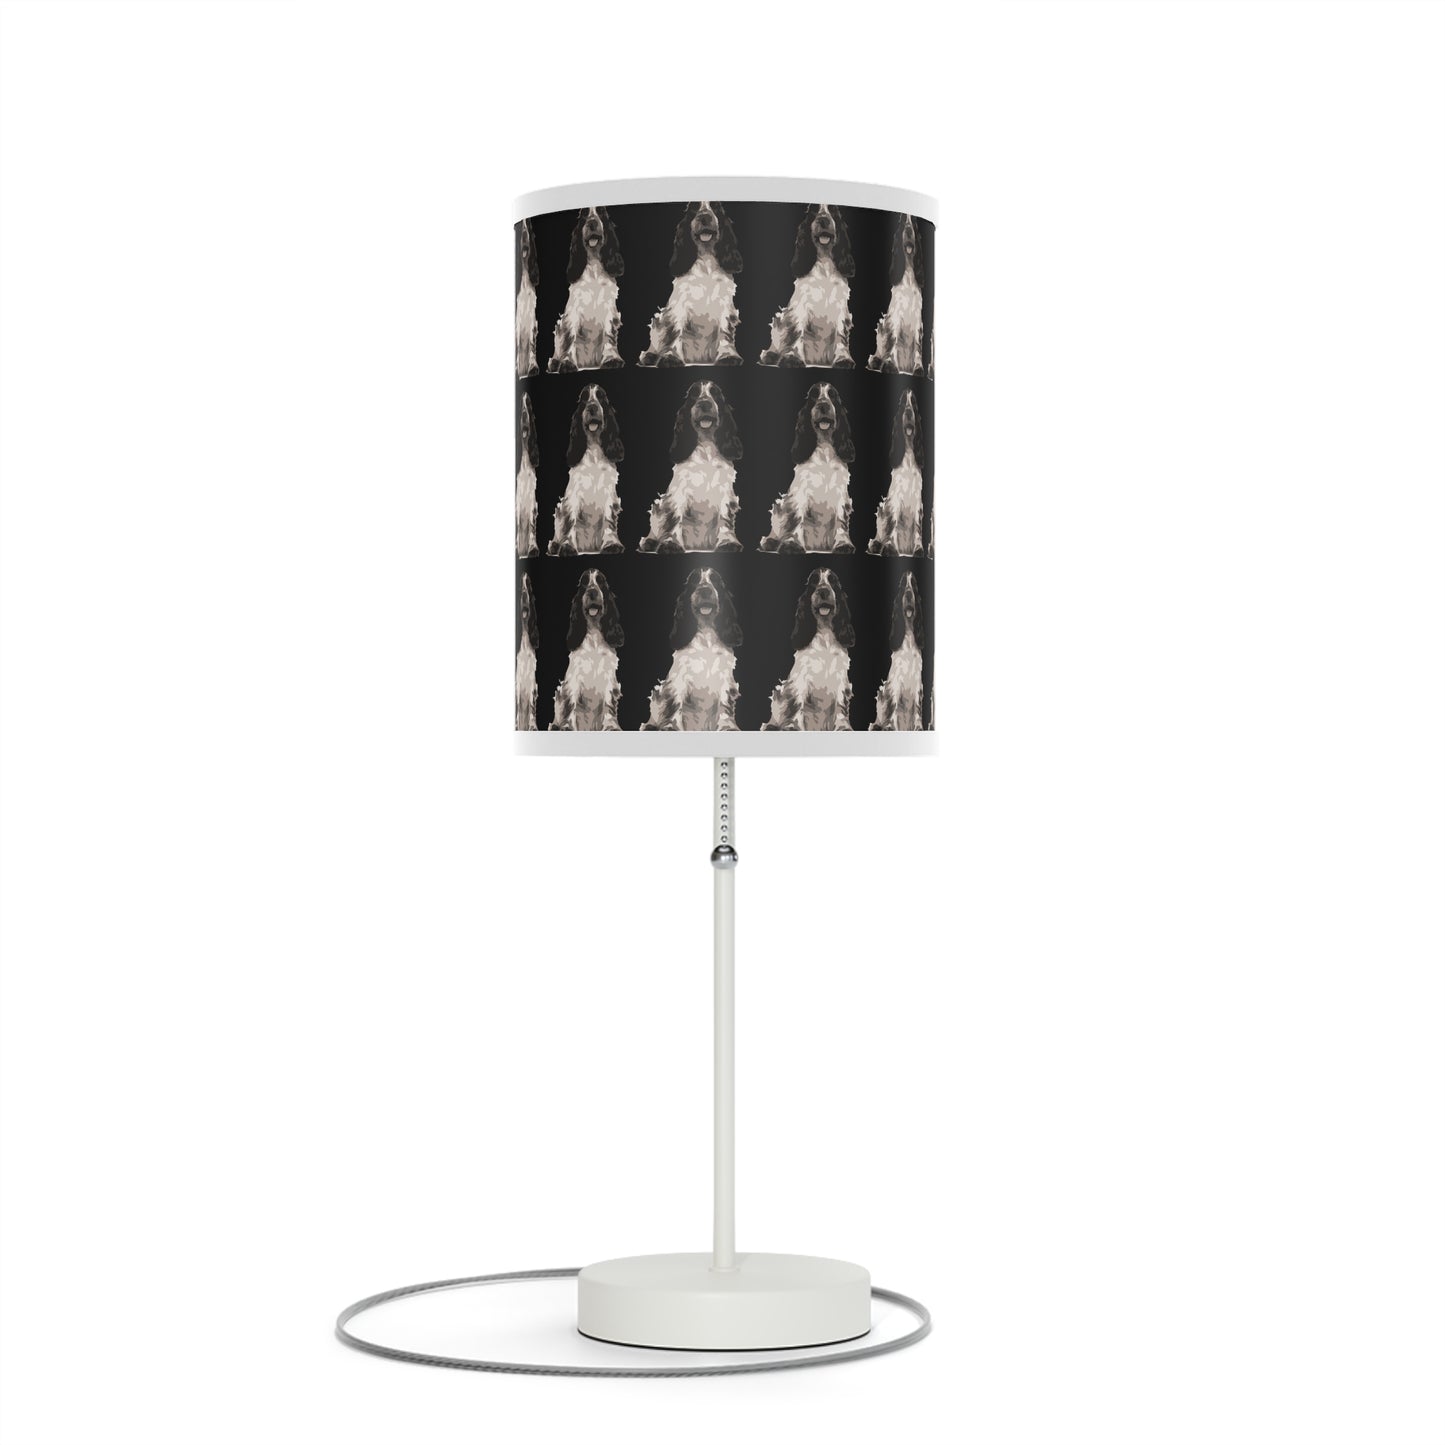 English cocker spaniel - Lamp on a Stand